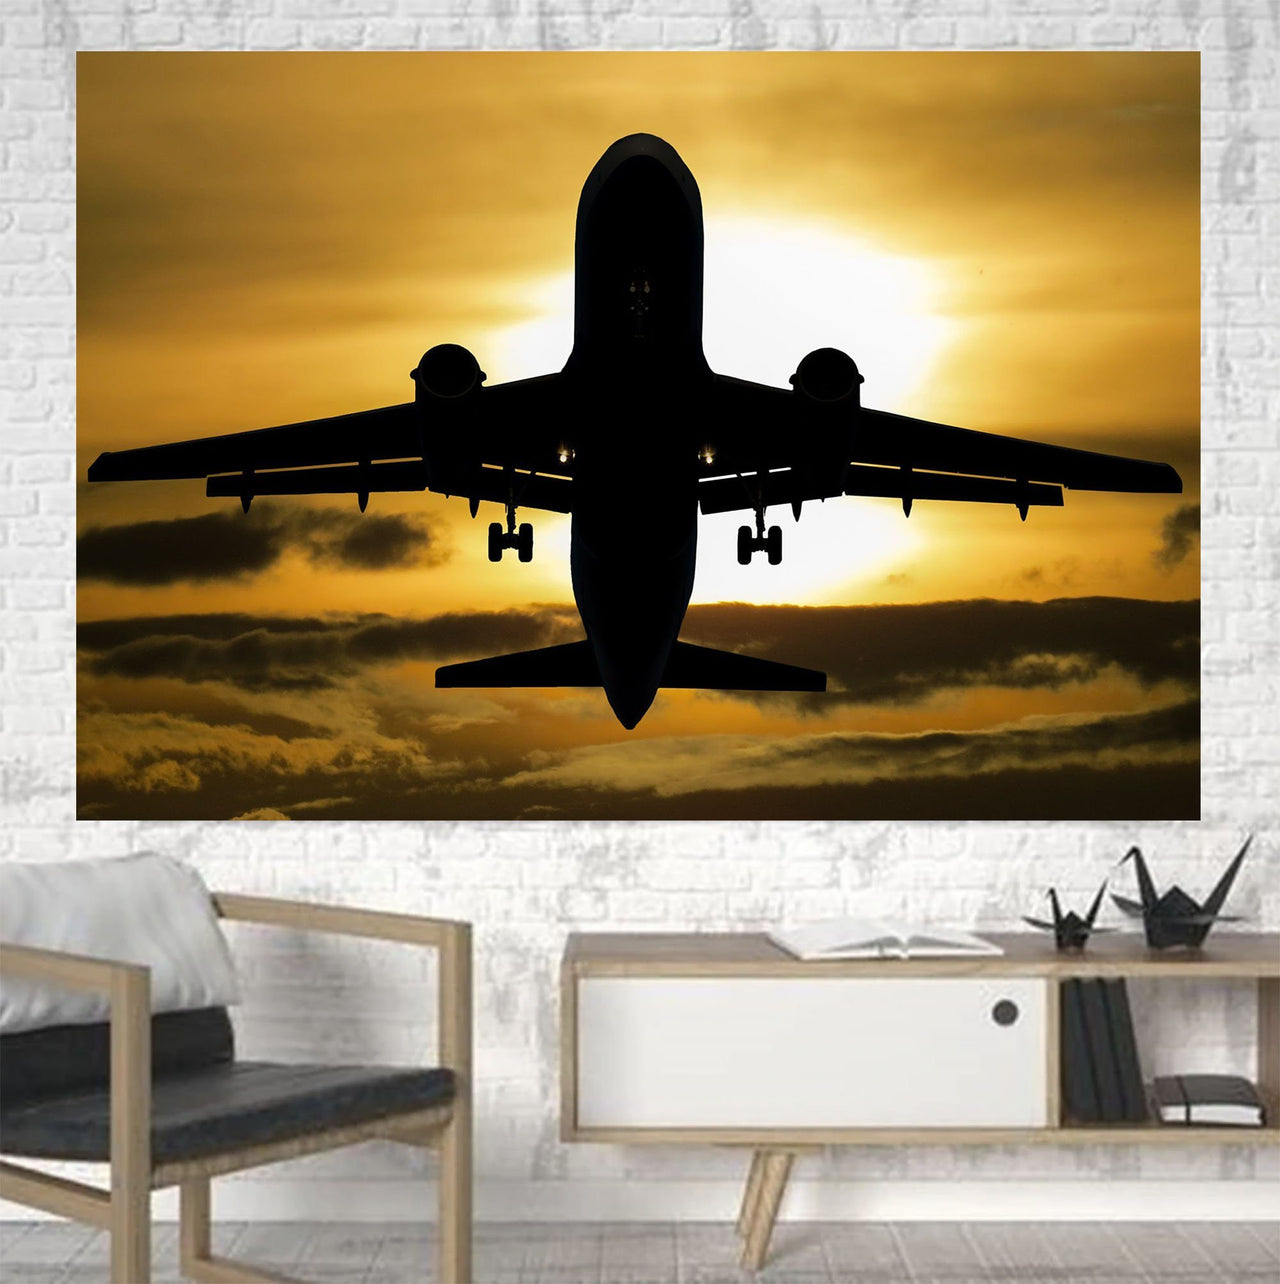 Departing Passenger Jet During Sunset Printed Canvas Posters (1 Piece) Aviation Shop 